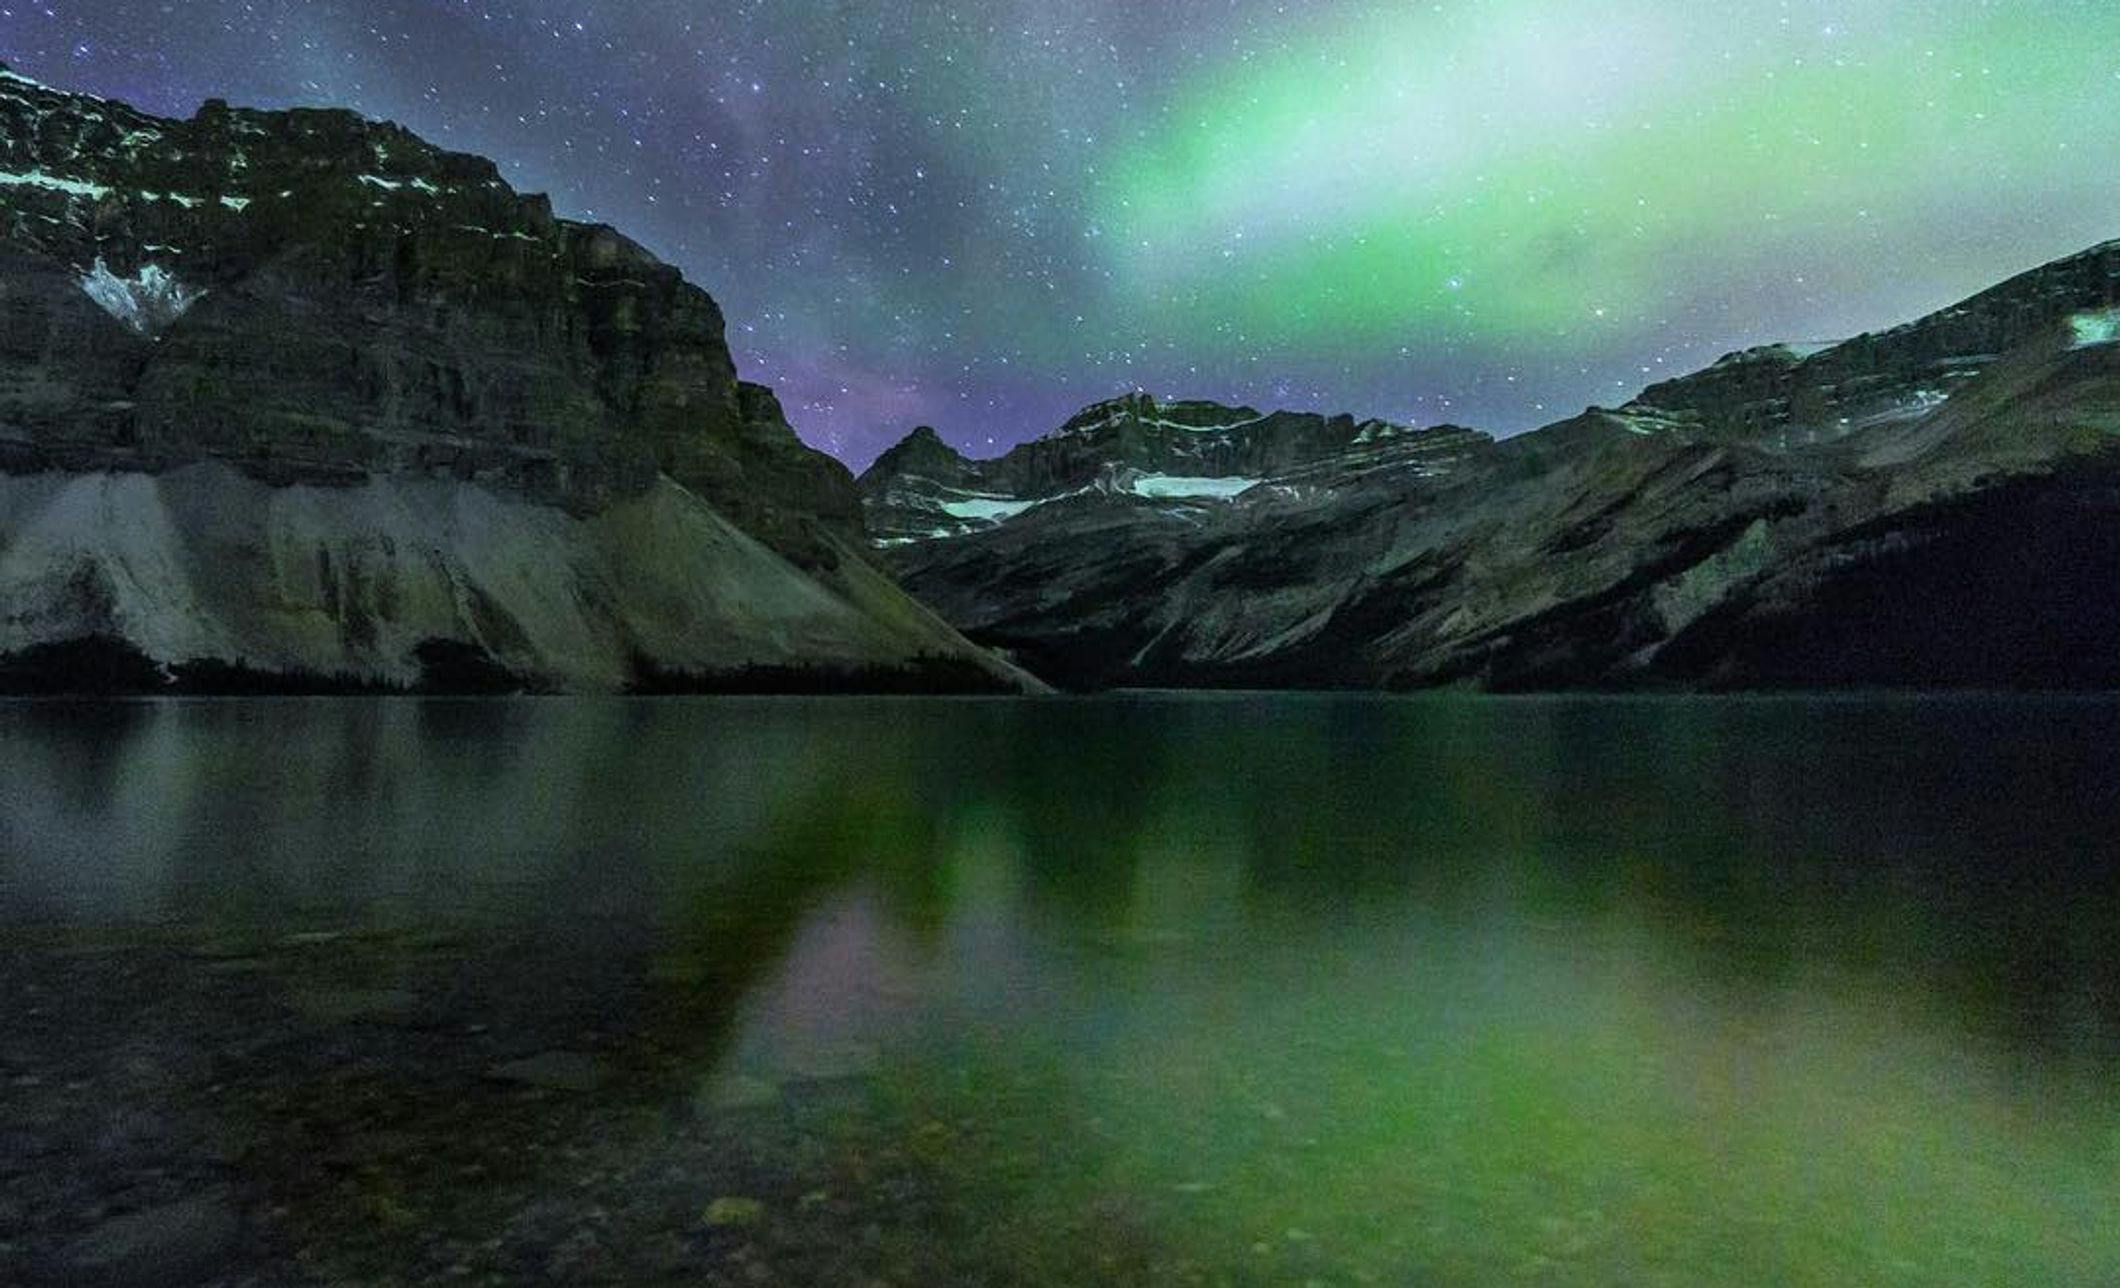 Colourful aurora and stars shine over mountaintops with Bow Lake in the foreground